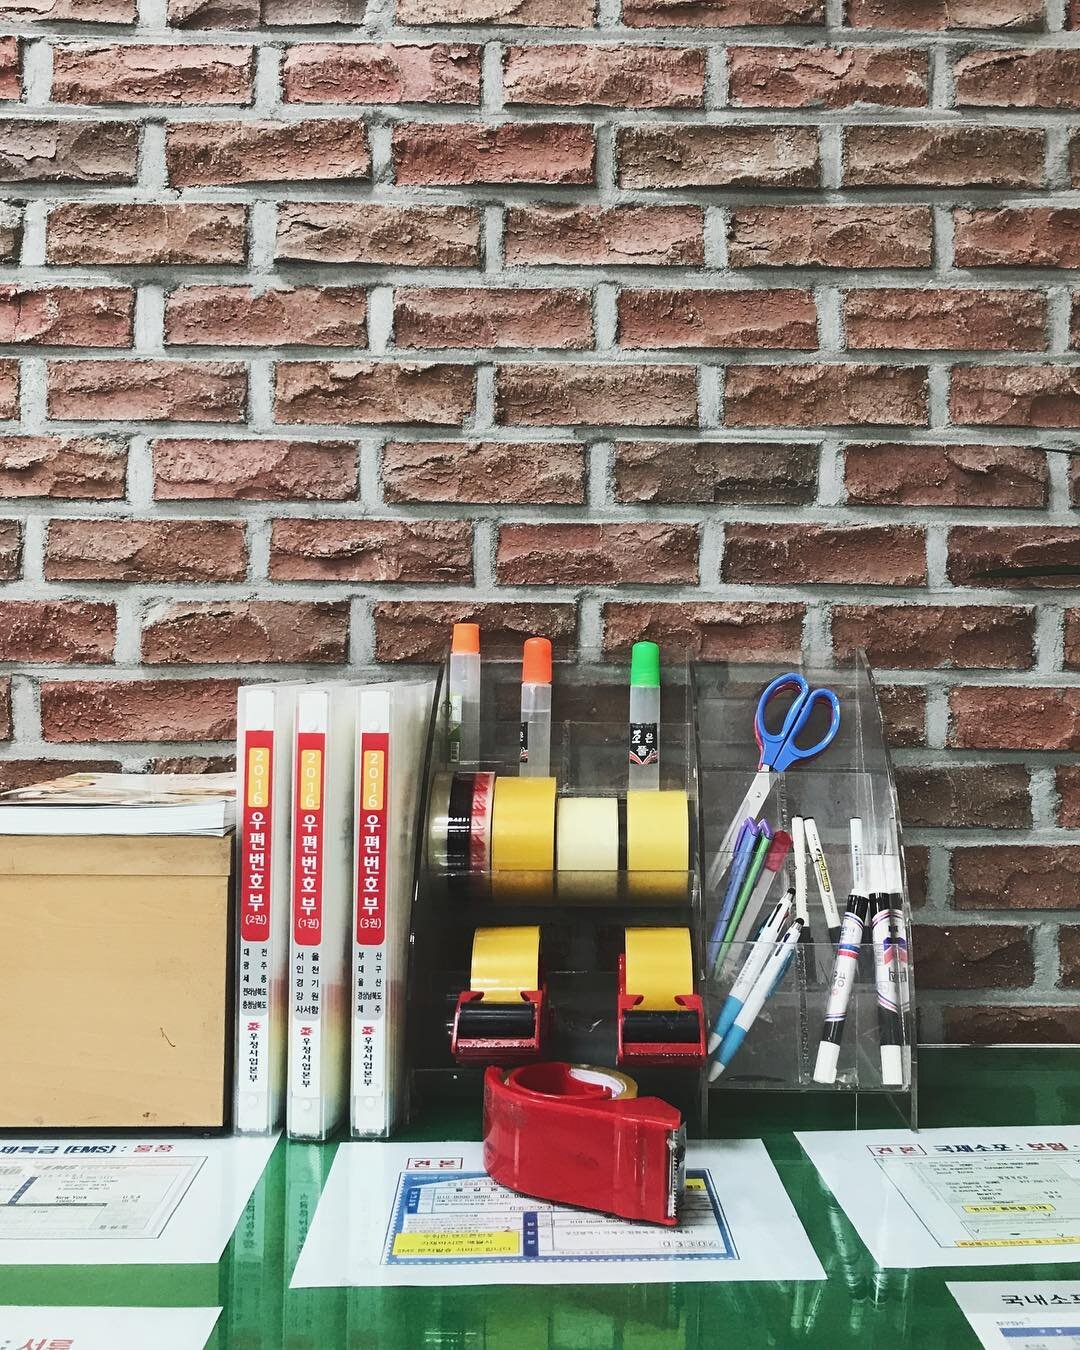 7 rolls of tape, 3 glue sticks, 2 pair of scissors, and 3 box cutters?! Love how prepared this Seoul post office work station is for their customers! ✂️🖇 .
.
#Seoul #Korea #PostOfficeLife #PostItPeople #SnailMail #WorkStation #OfficeSupplies 📮💌
.
